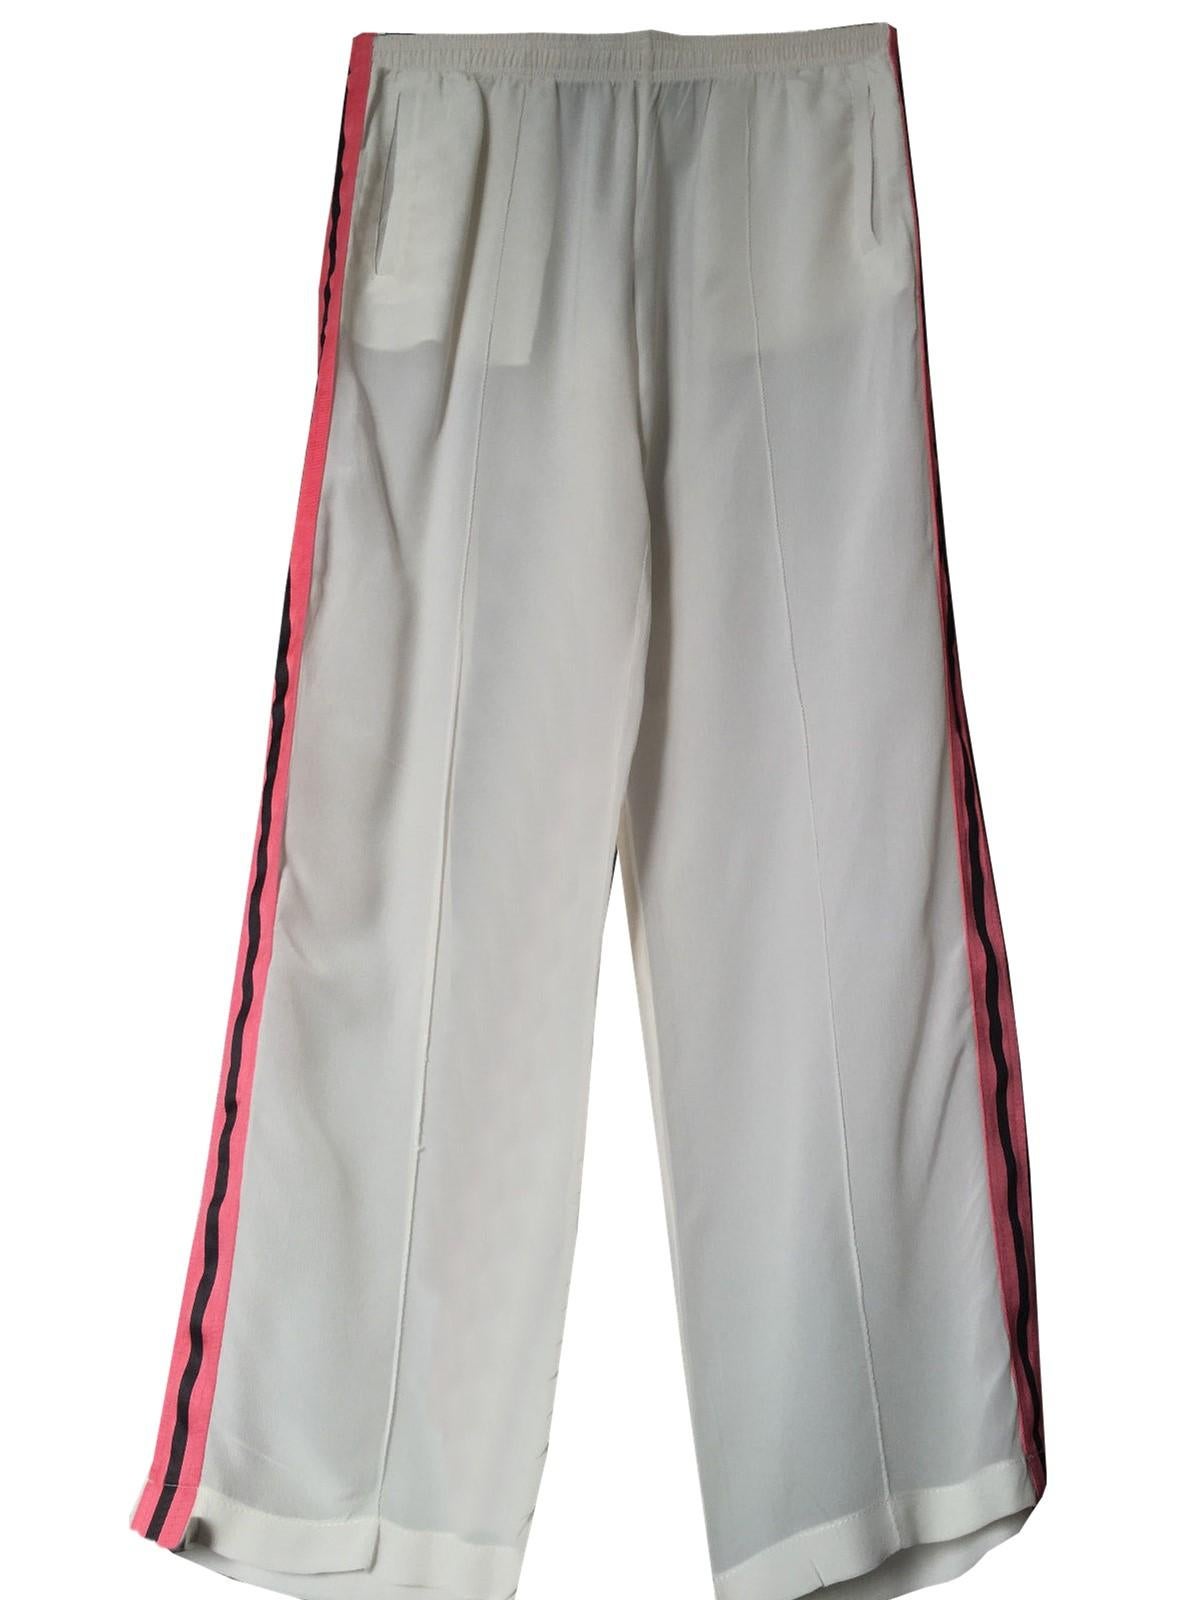 New Rare Tom Ford For Gucci Farewell Collection Silk Runway Pants 2004 Sz 44 8